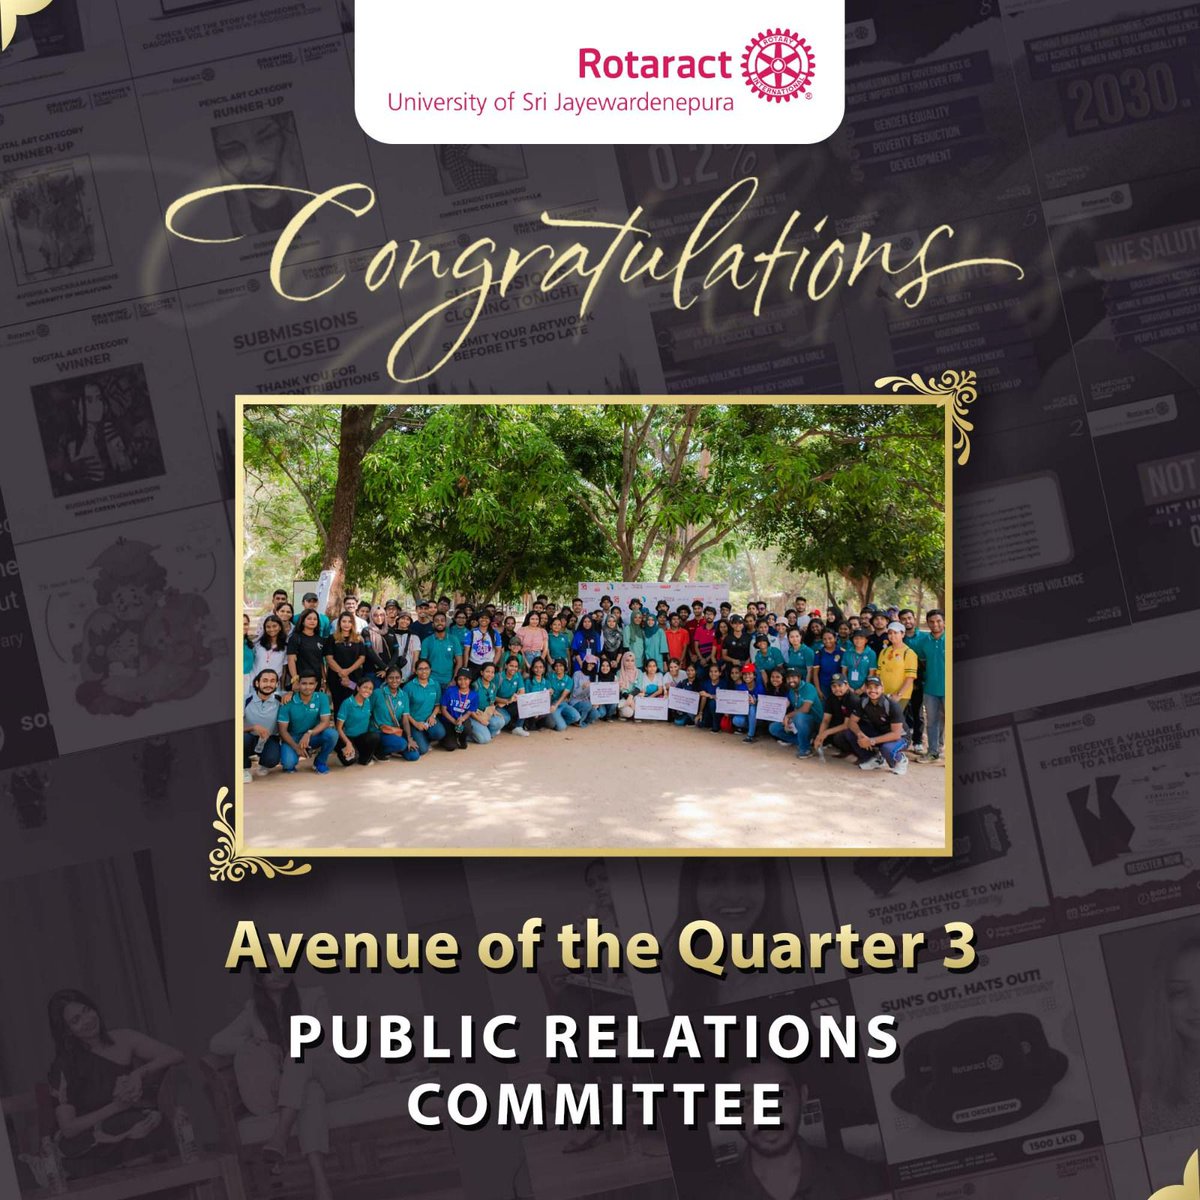 Congratulations to the Public Relations Committee of the Rotaract Club of University of Sri Jayewardenepura for being recognized as Avenue of the 3rd Quarter! 🎉

#RACUSJ
#Rotaract 
#Rotaract3220
#CreateHopeintheWorld
#YouthForAll